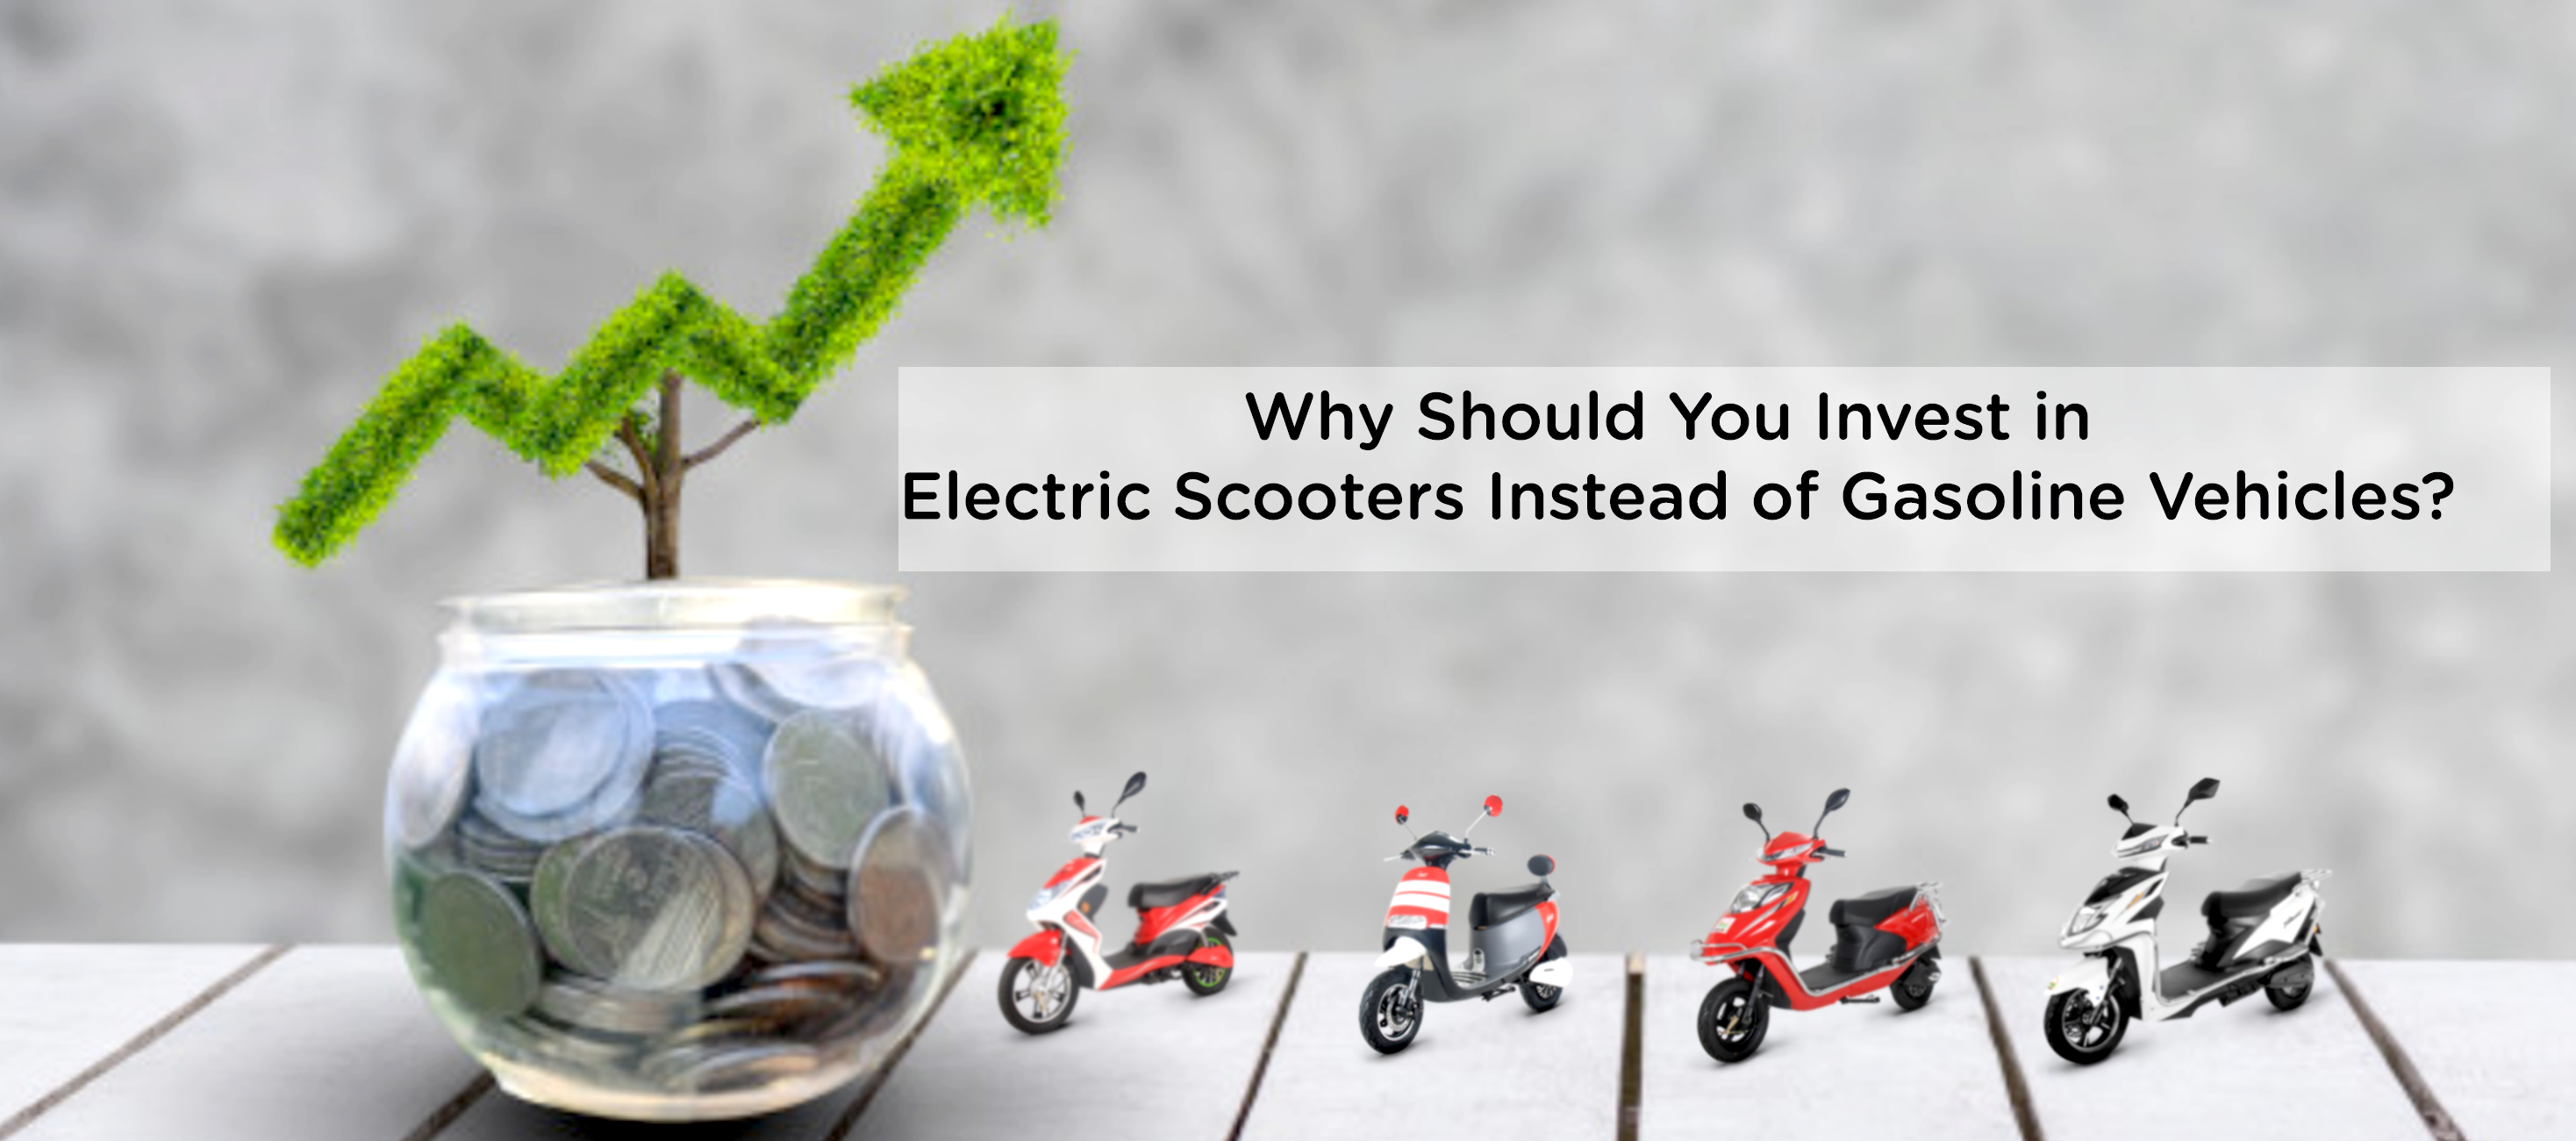 WHY SHOULD YOU INVEST IN ELECTRIC SCOOTERS INSTEAD OF GASOLINE VEHICLES?